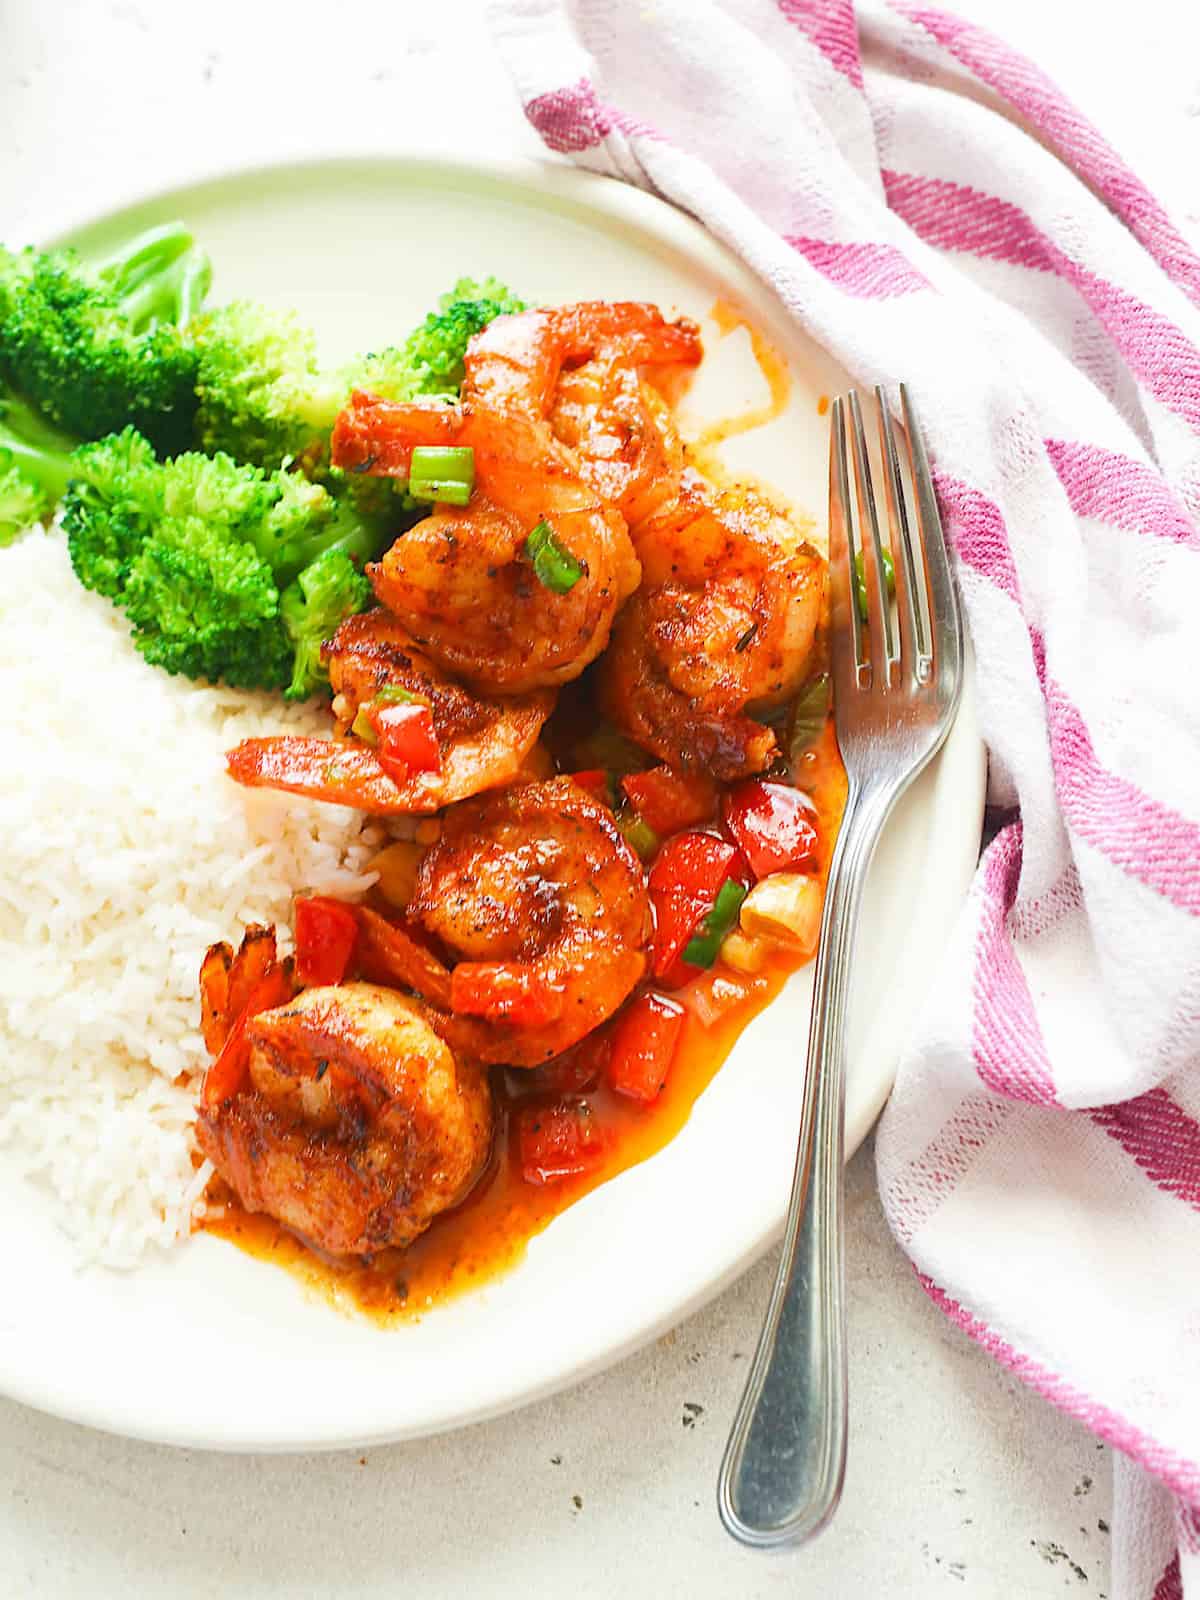 Cajun shrimp with rice and blanched broccoli